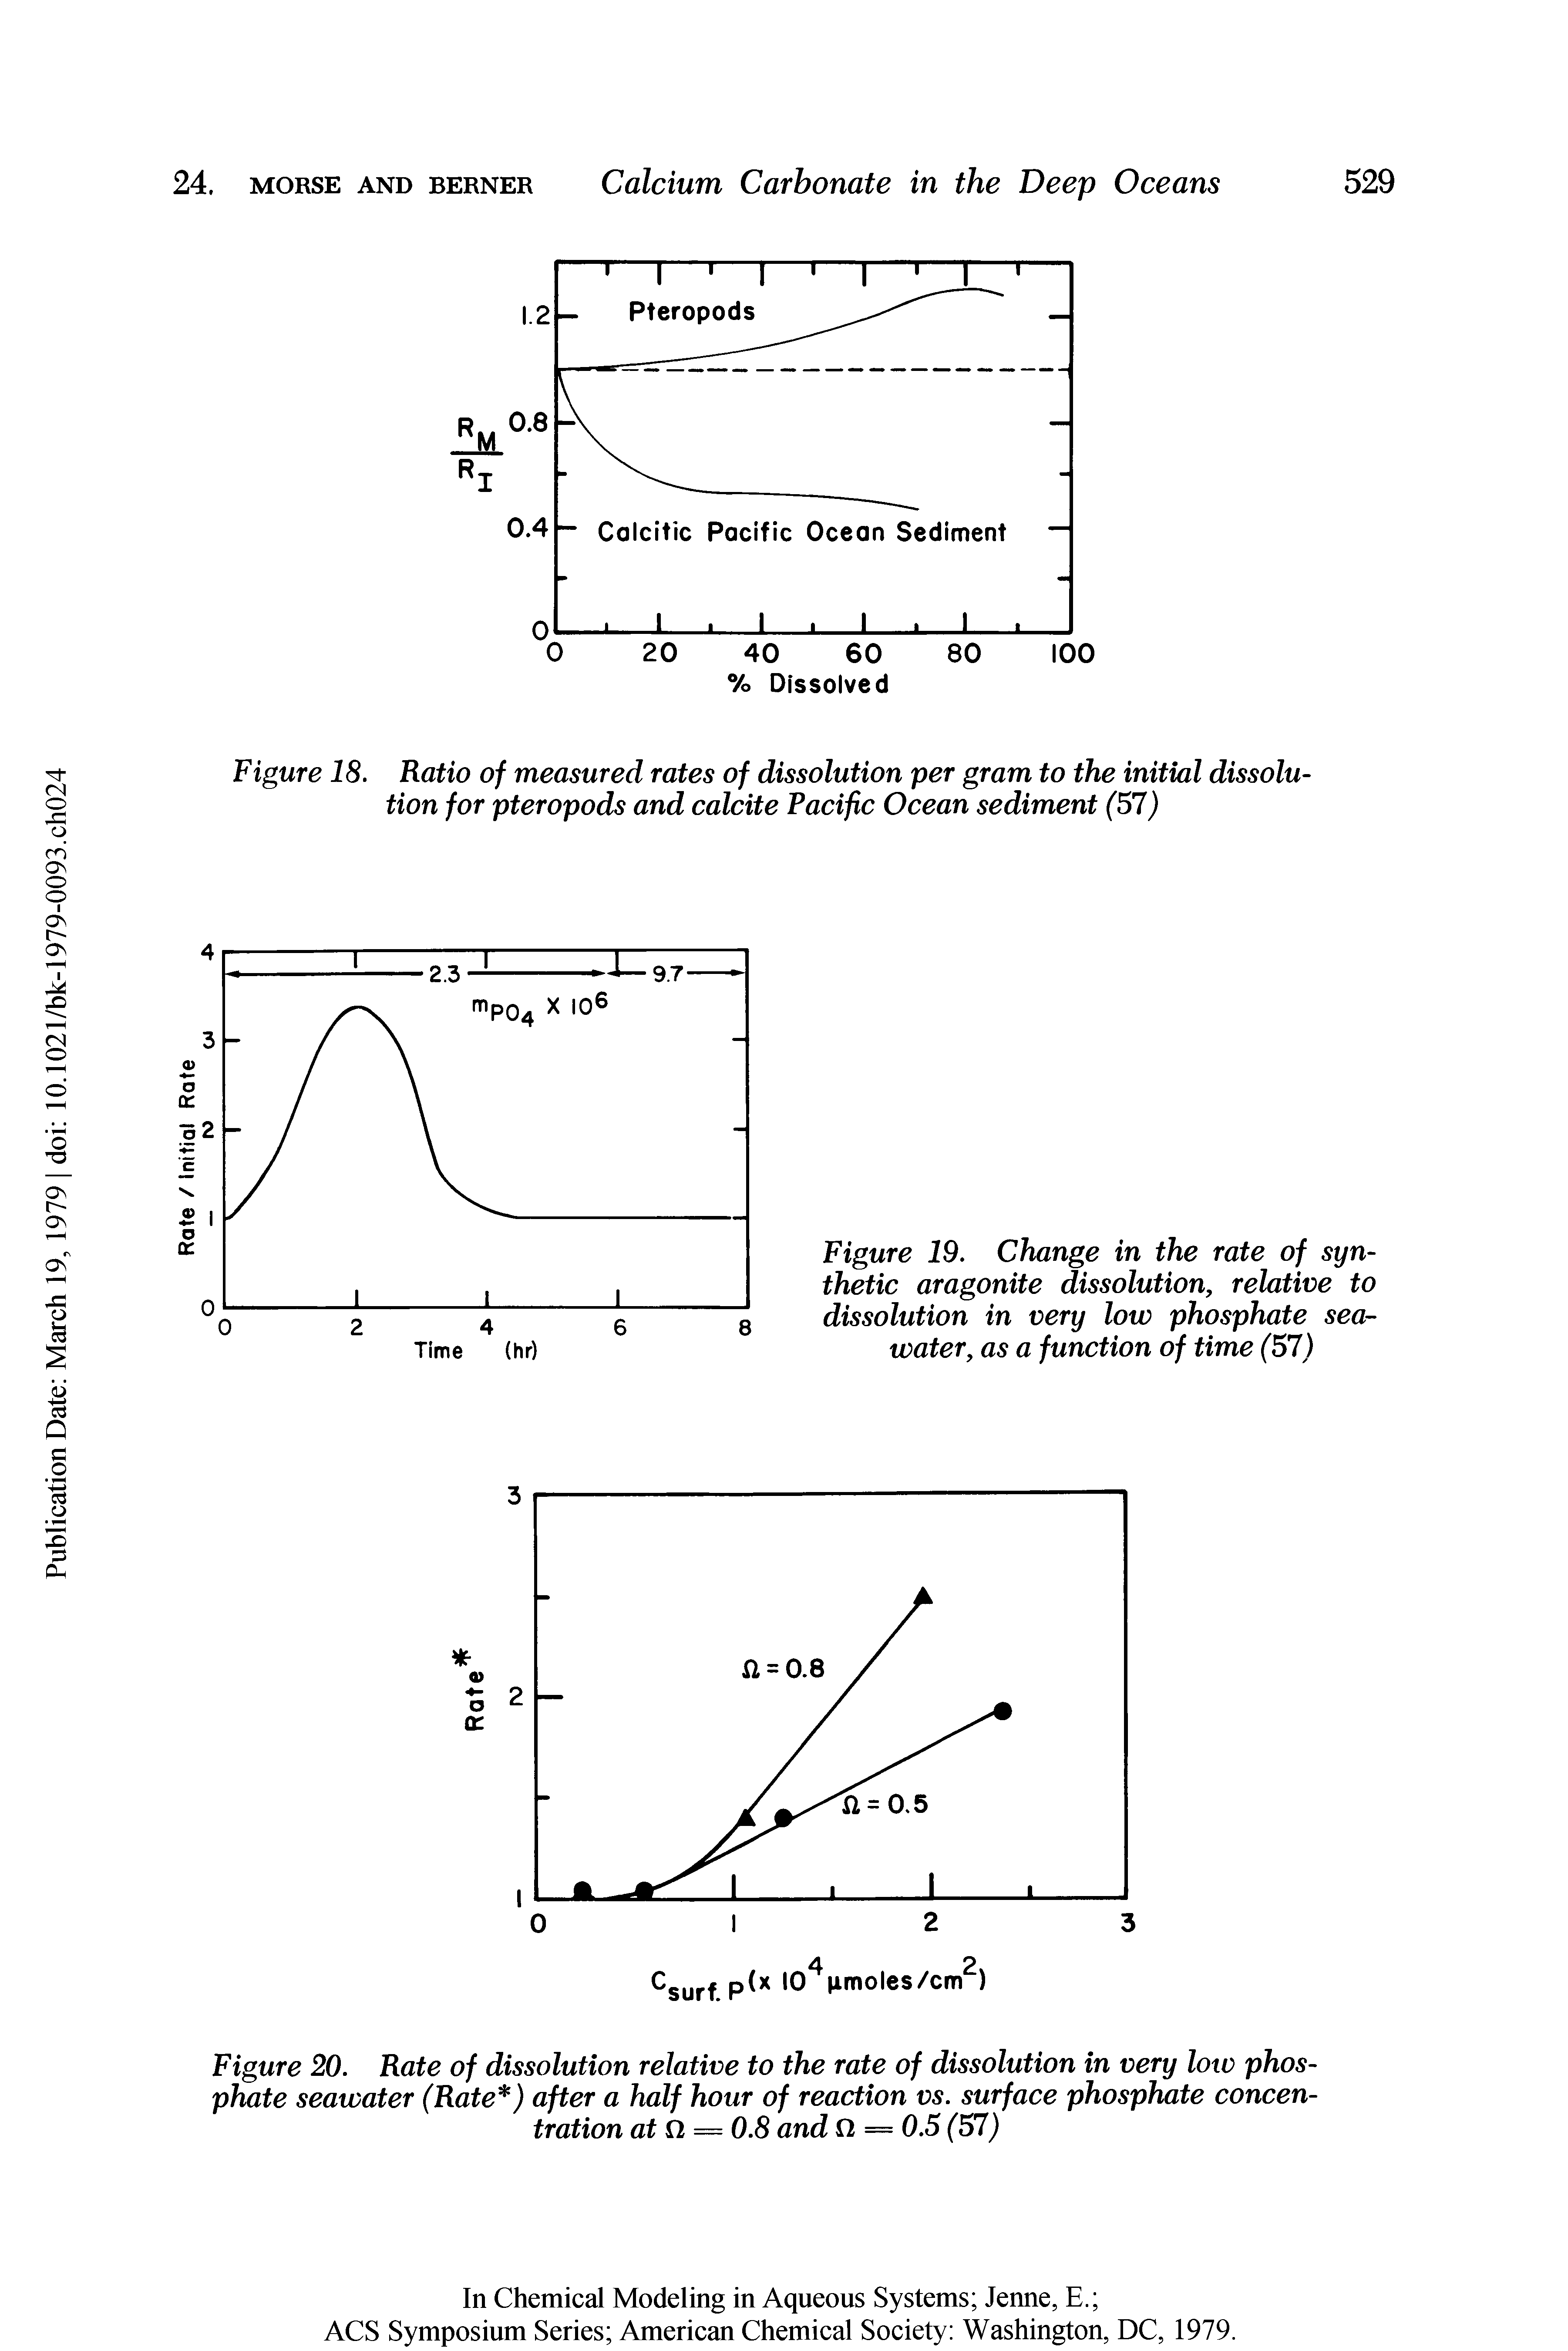 Figure 19. Change in the rate of synthetic aragonite dissolution, relative to dissolution in very low phosphate seawater, as a function of time (57)...